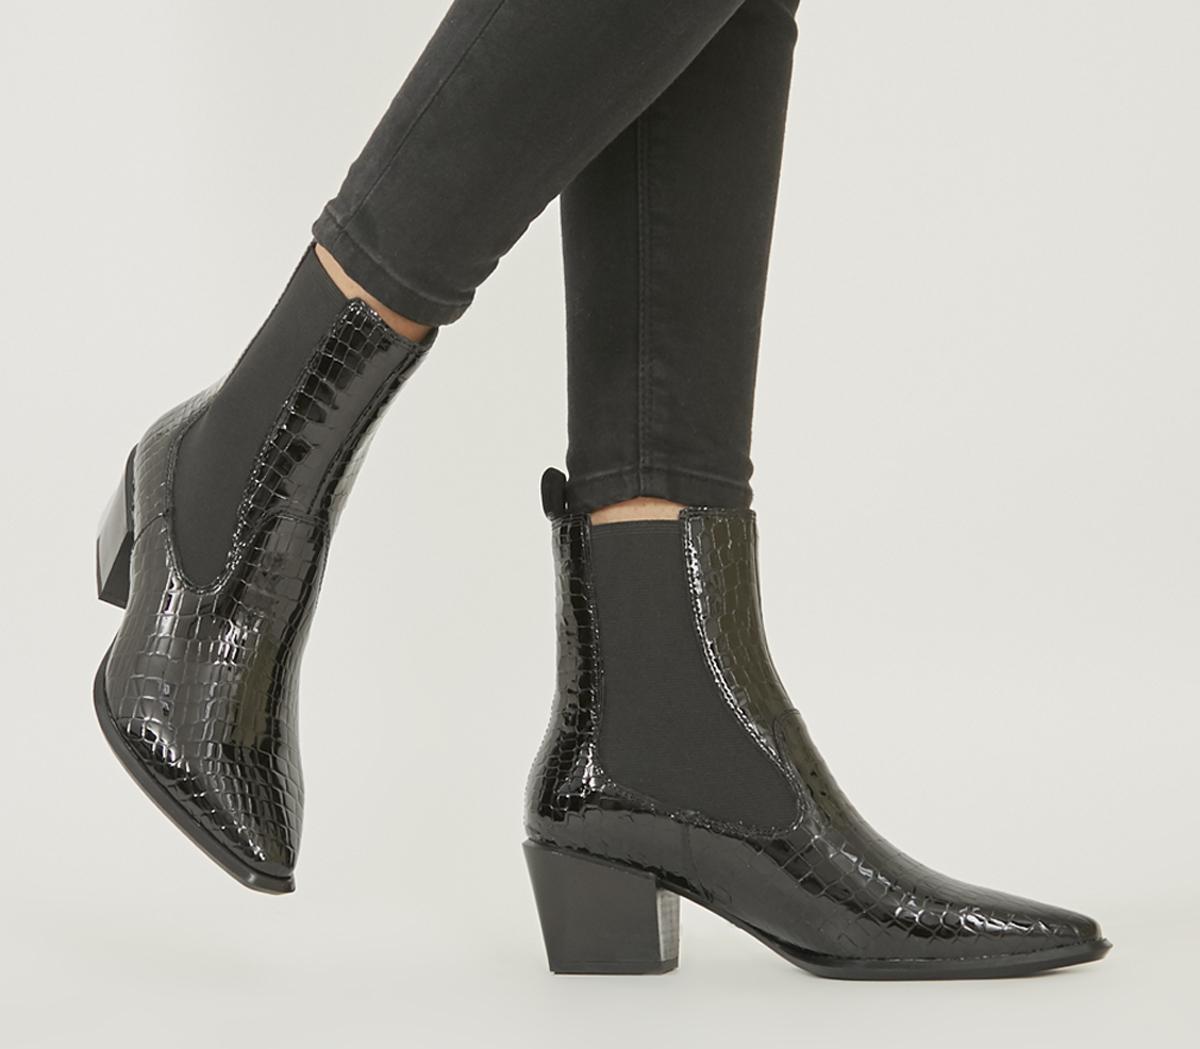 Details about   Vagabond Betsy Pointed Toe Block Heel Chelsea Boot In Black Size US 5-11